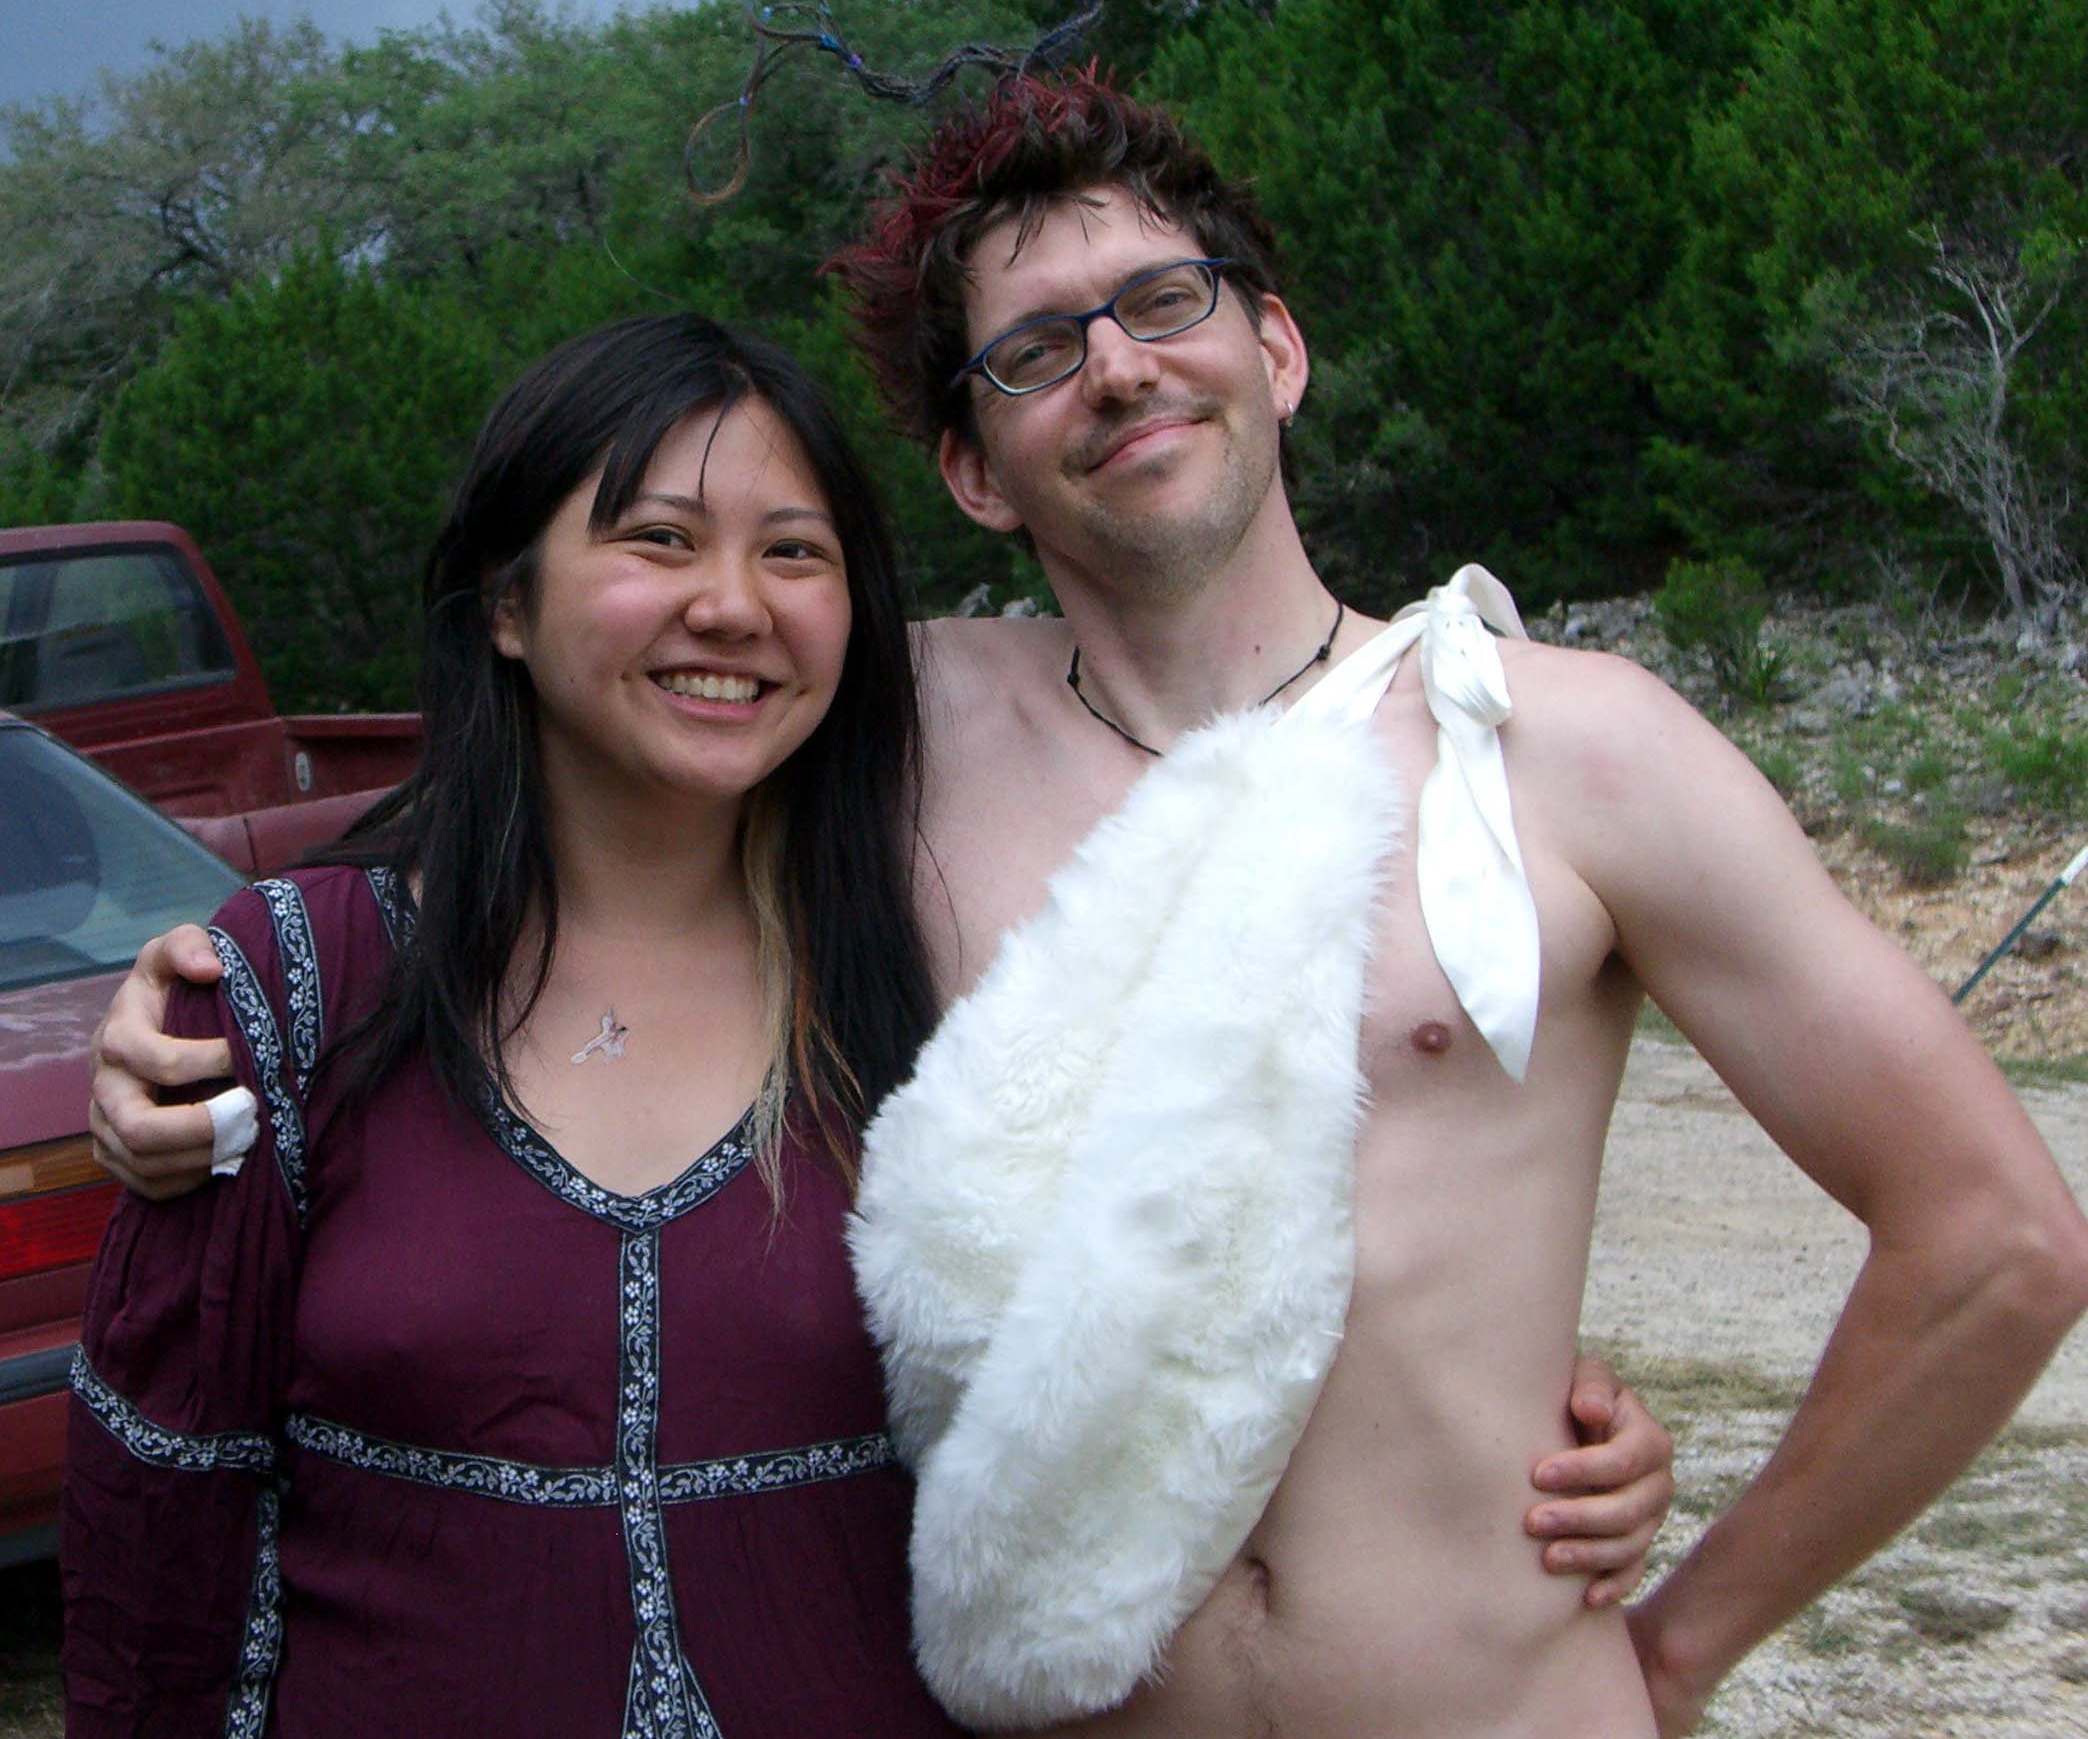 Winnie and a guy from Ish camp at Burning Flipside 2007